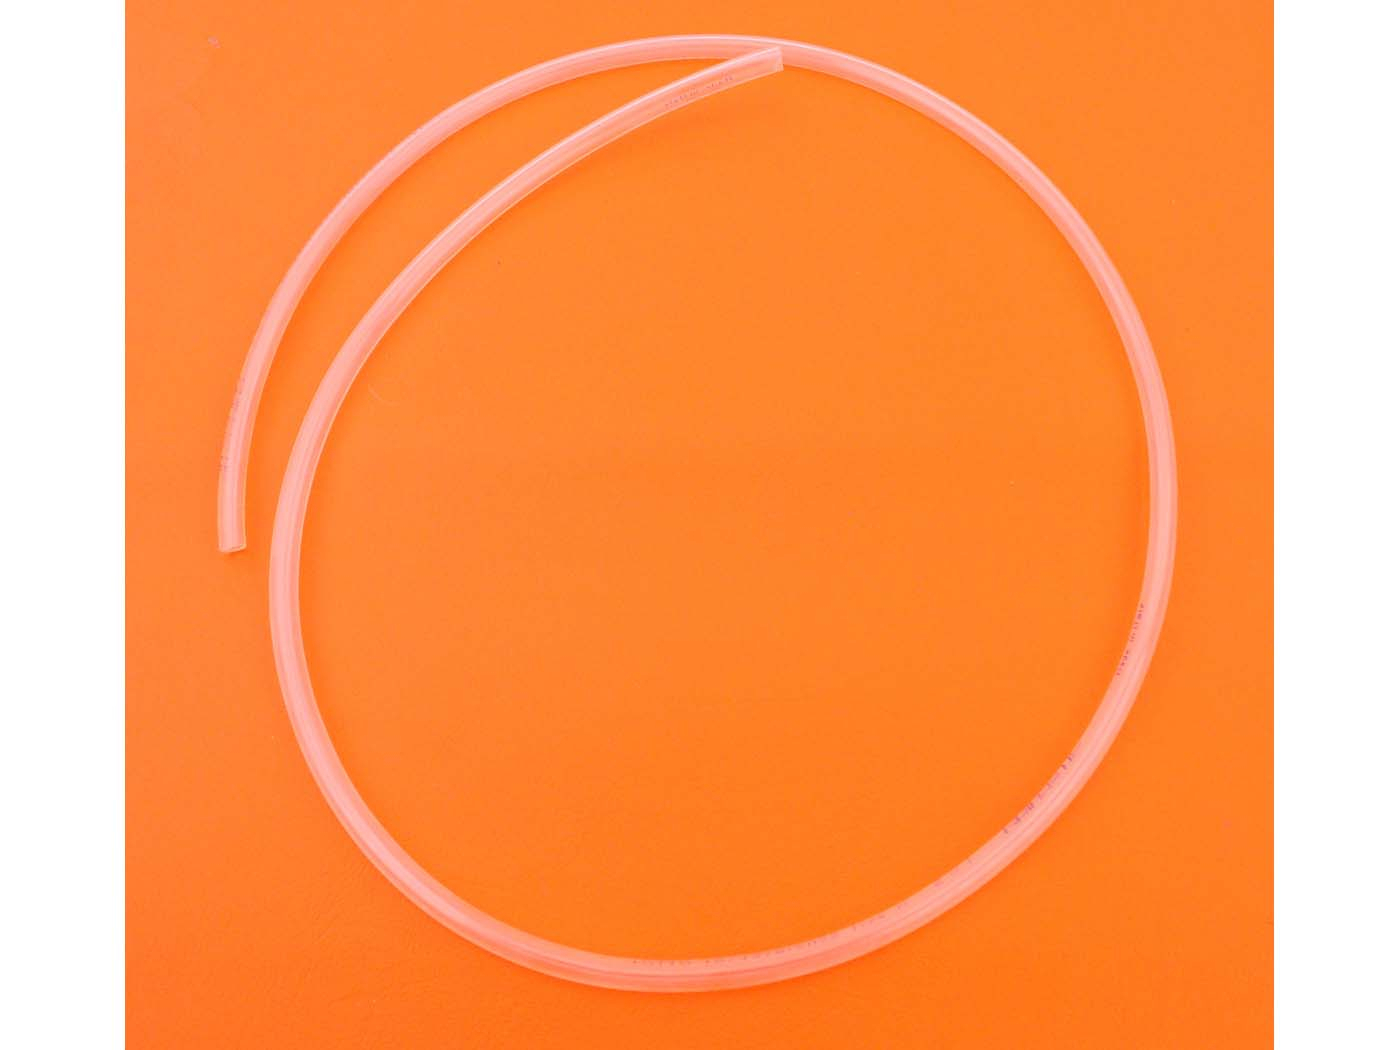 Fuel Hose Drilastic Transparent 1 Meter 6-7mm For Moped Mokick Moped Scooter